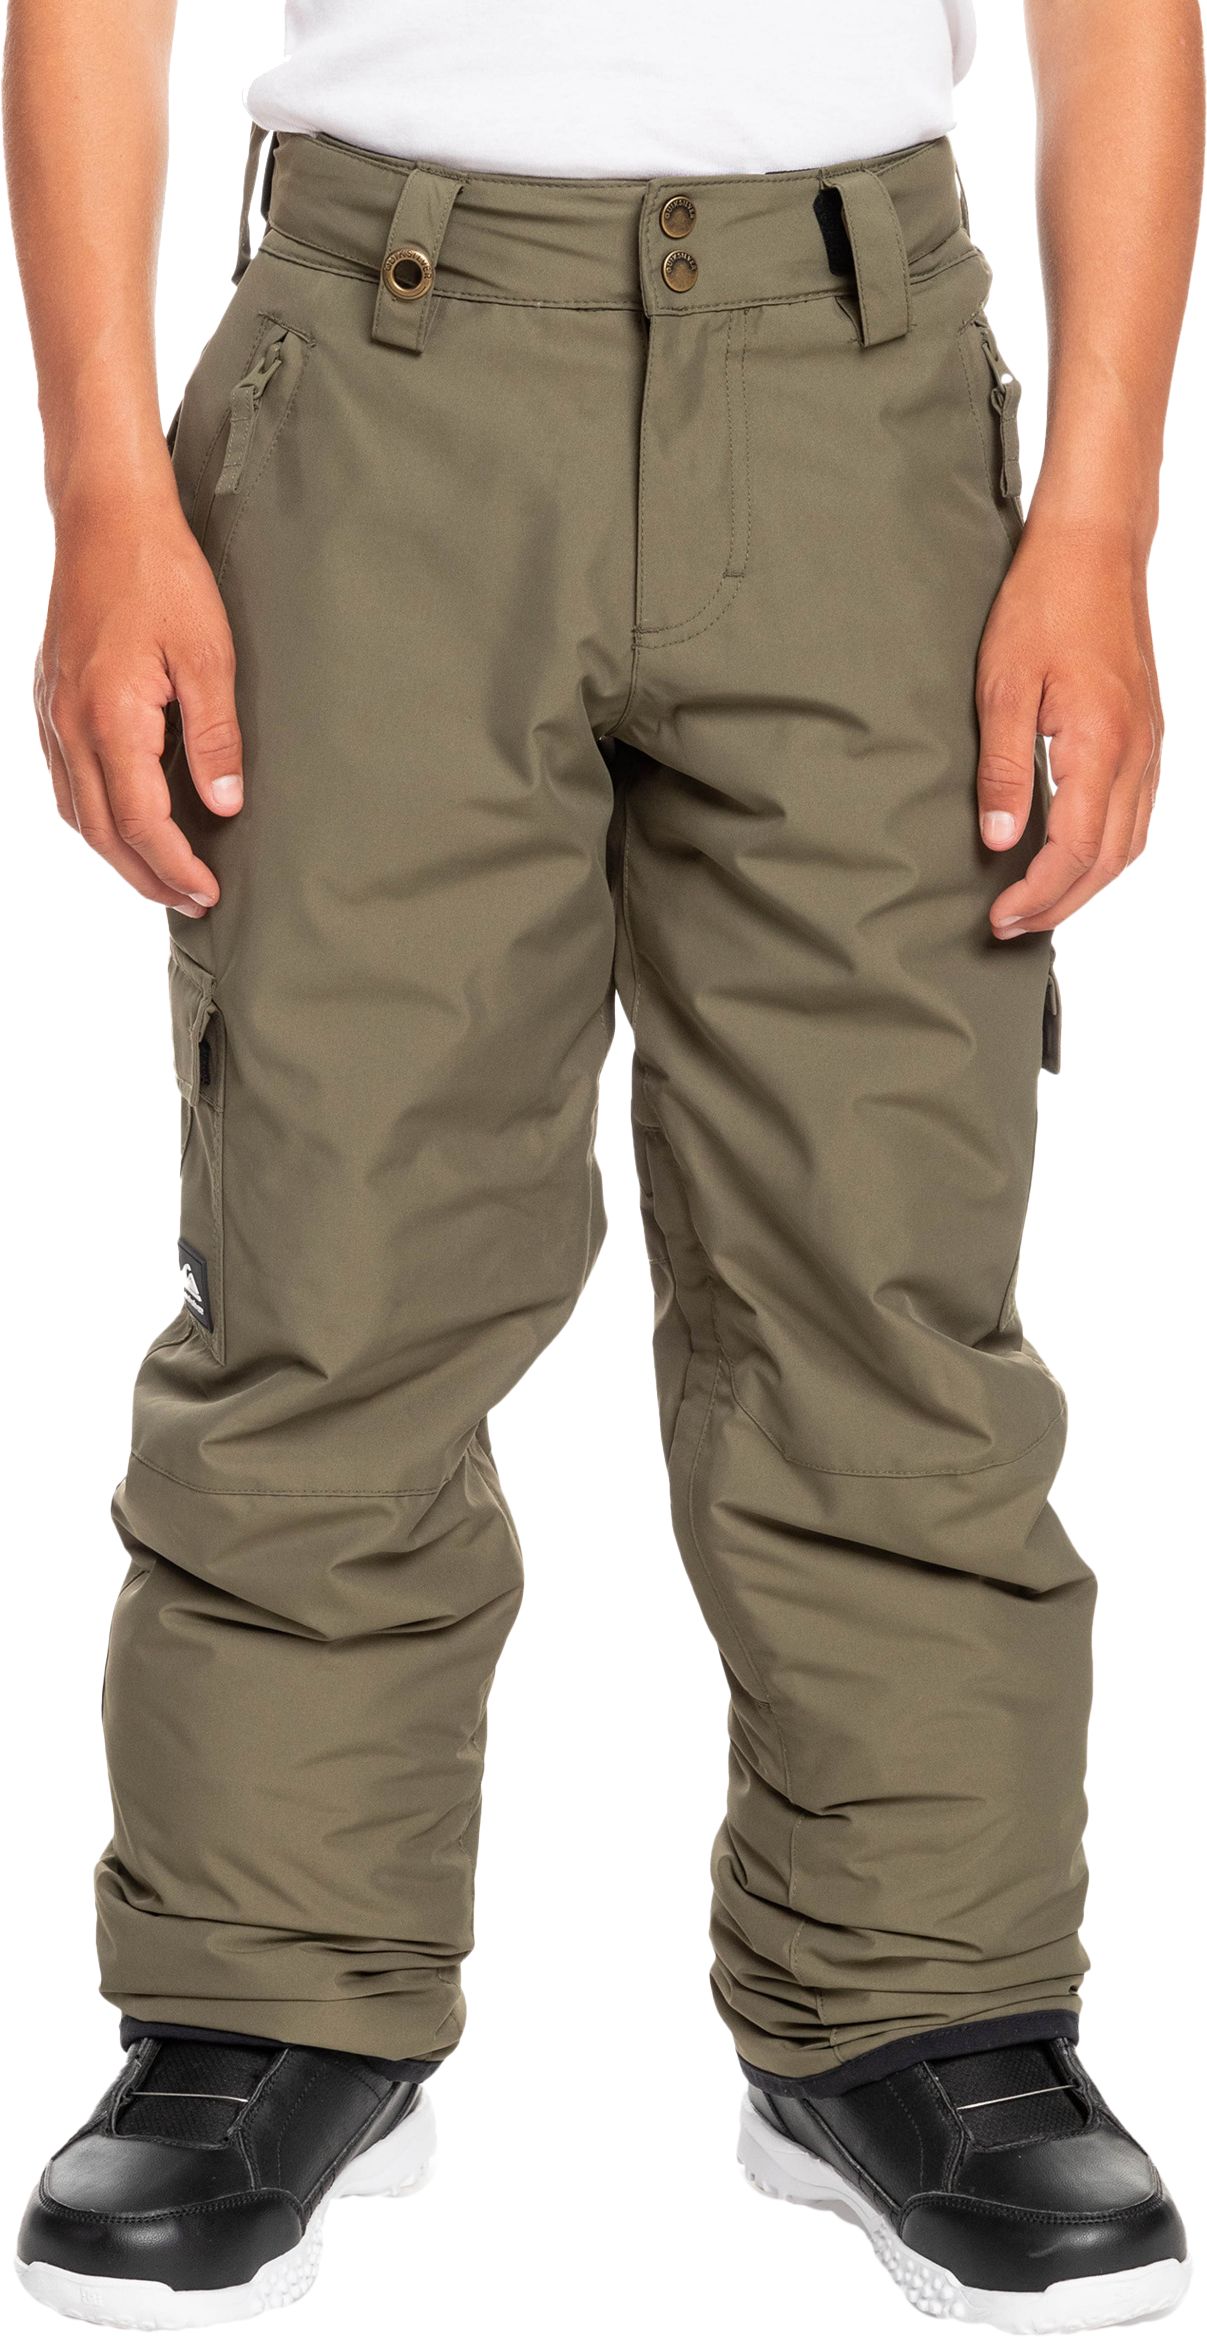 QUIKSILVER, J PORTER YOUTH PANT